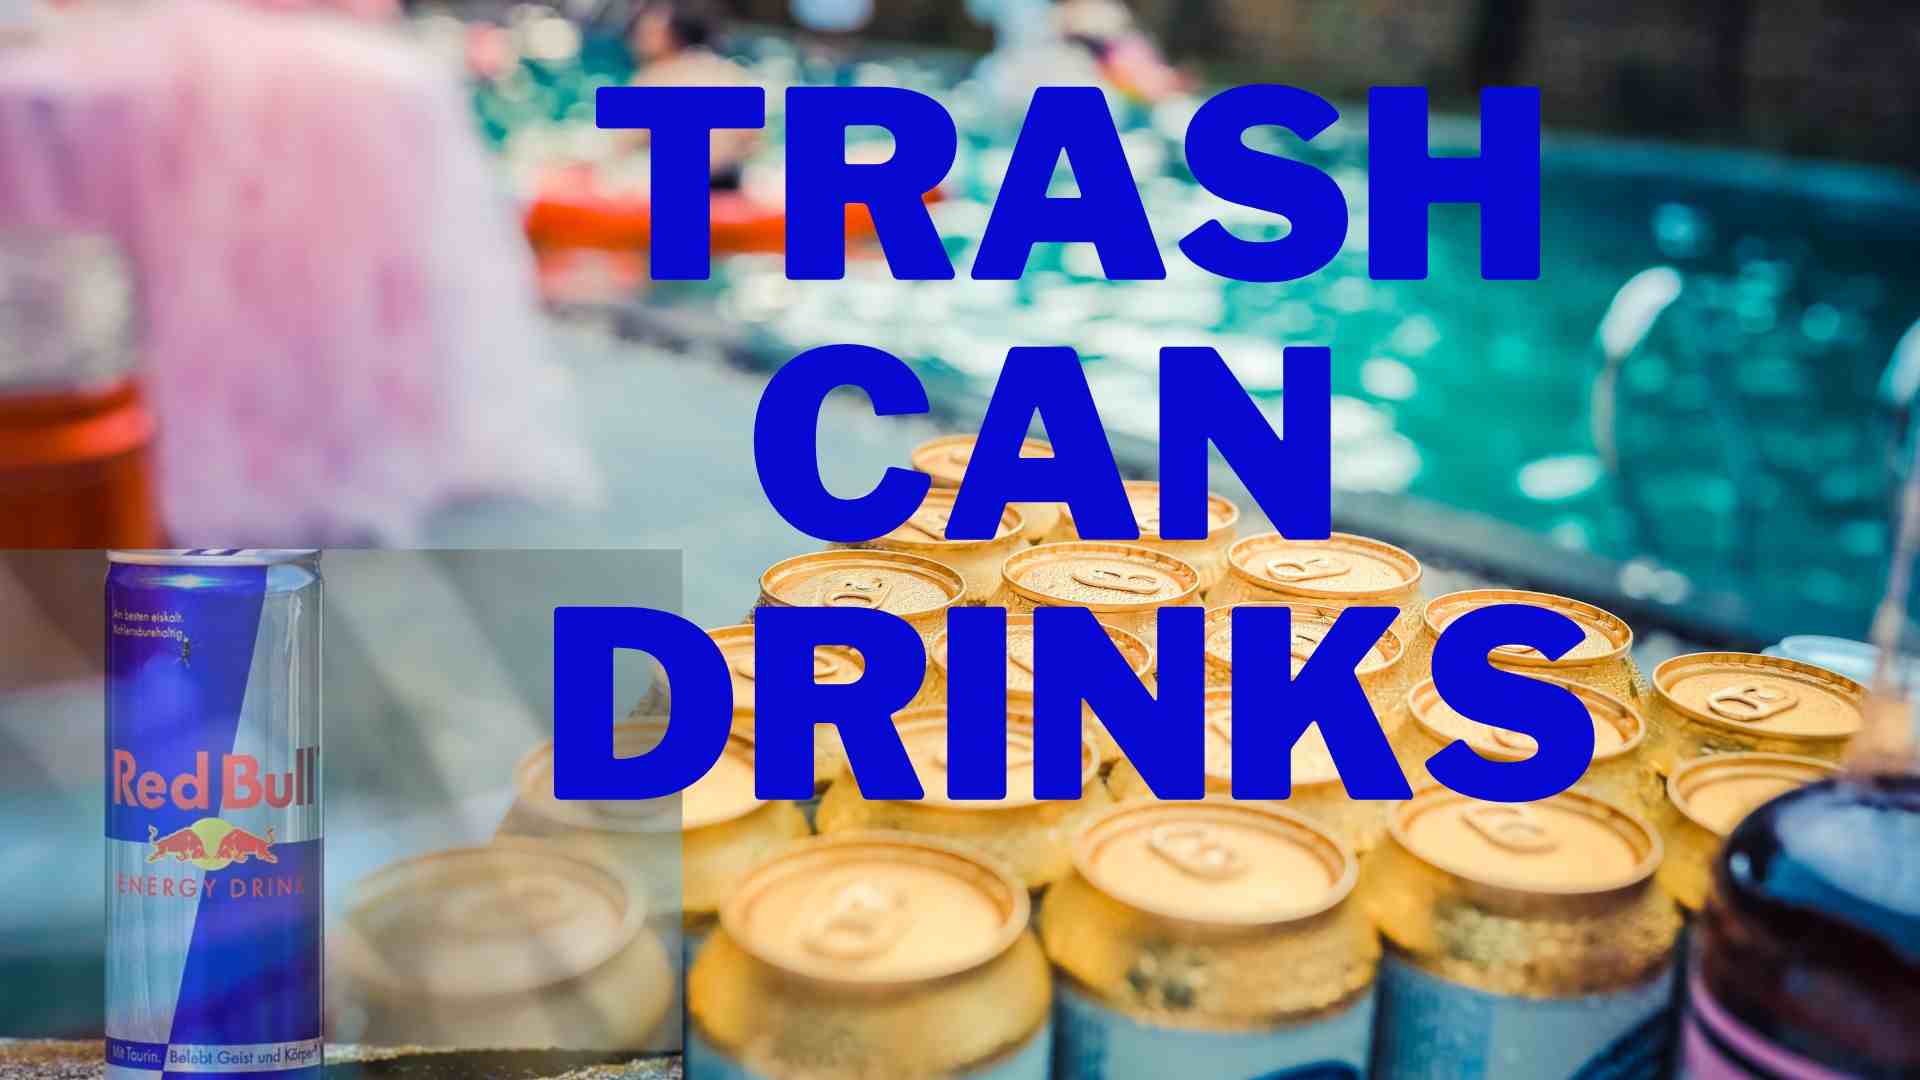 Irish Trash can drink Recipe: Variations, Cost and Health factors